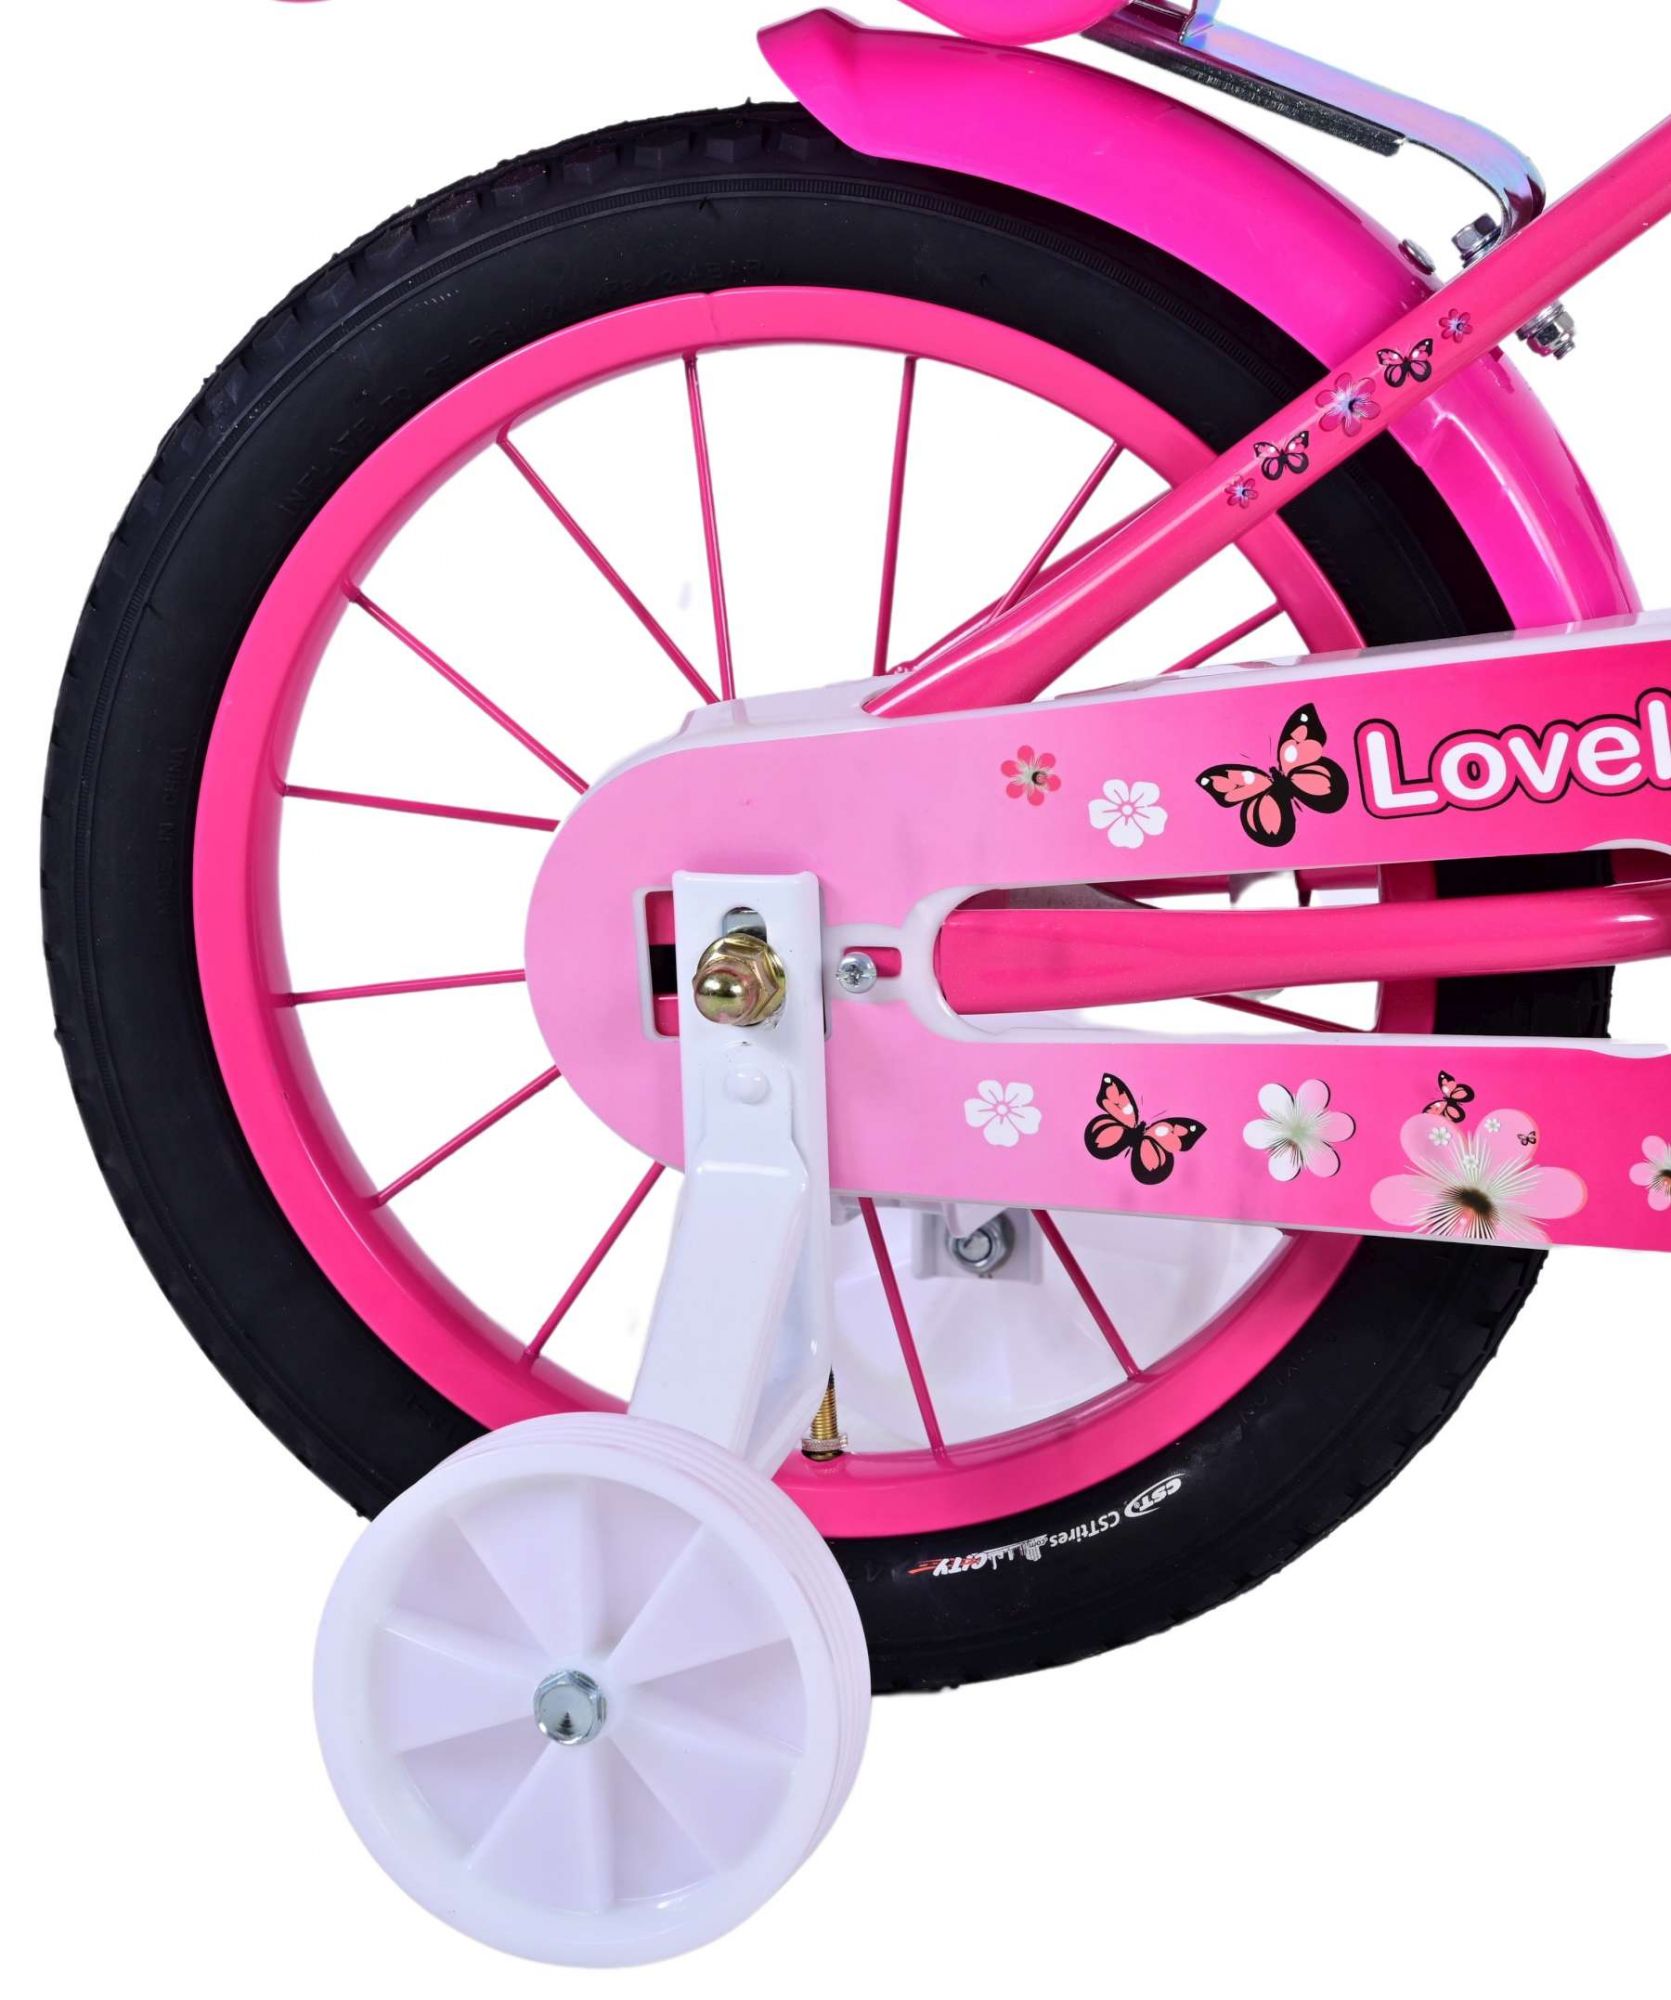 Volare_Lovely_kinderfiets_14_inch_-_3-W1800